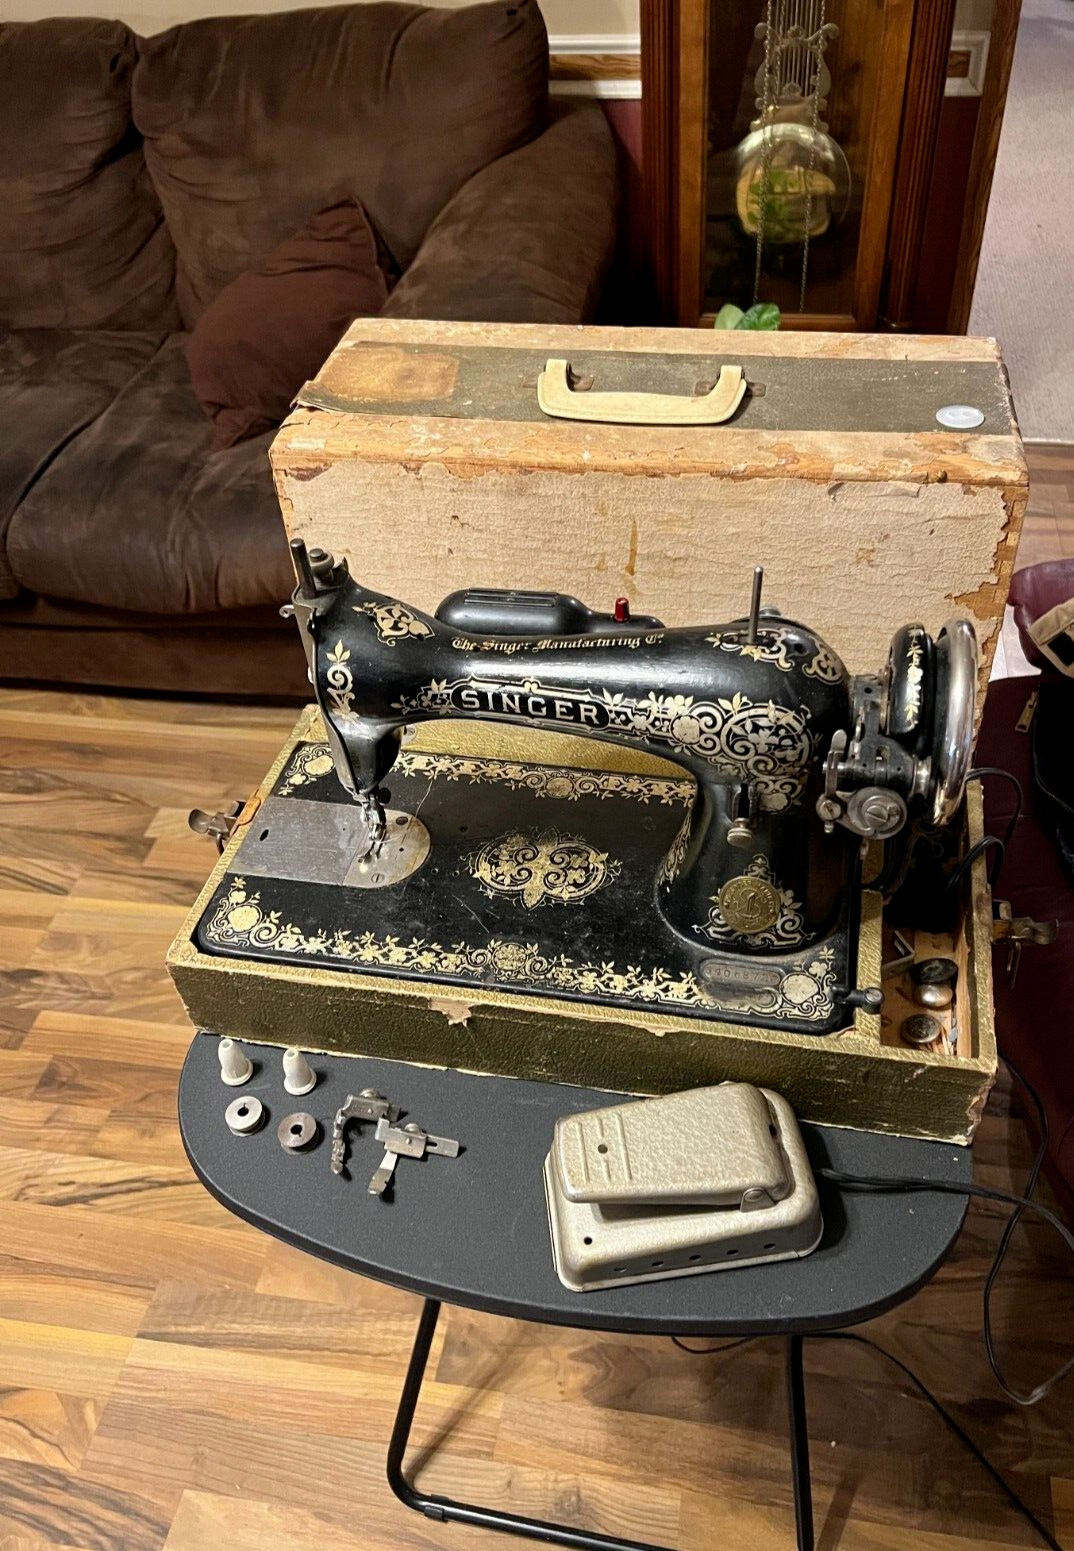 Antique Singer sewing machine model 115 made in 1915